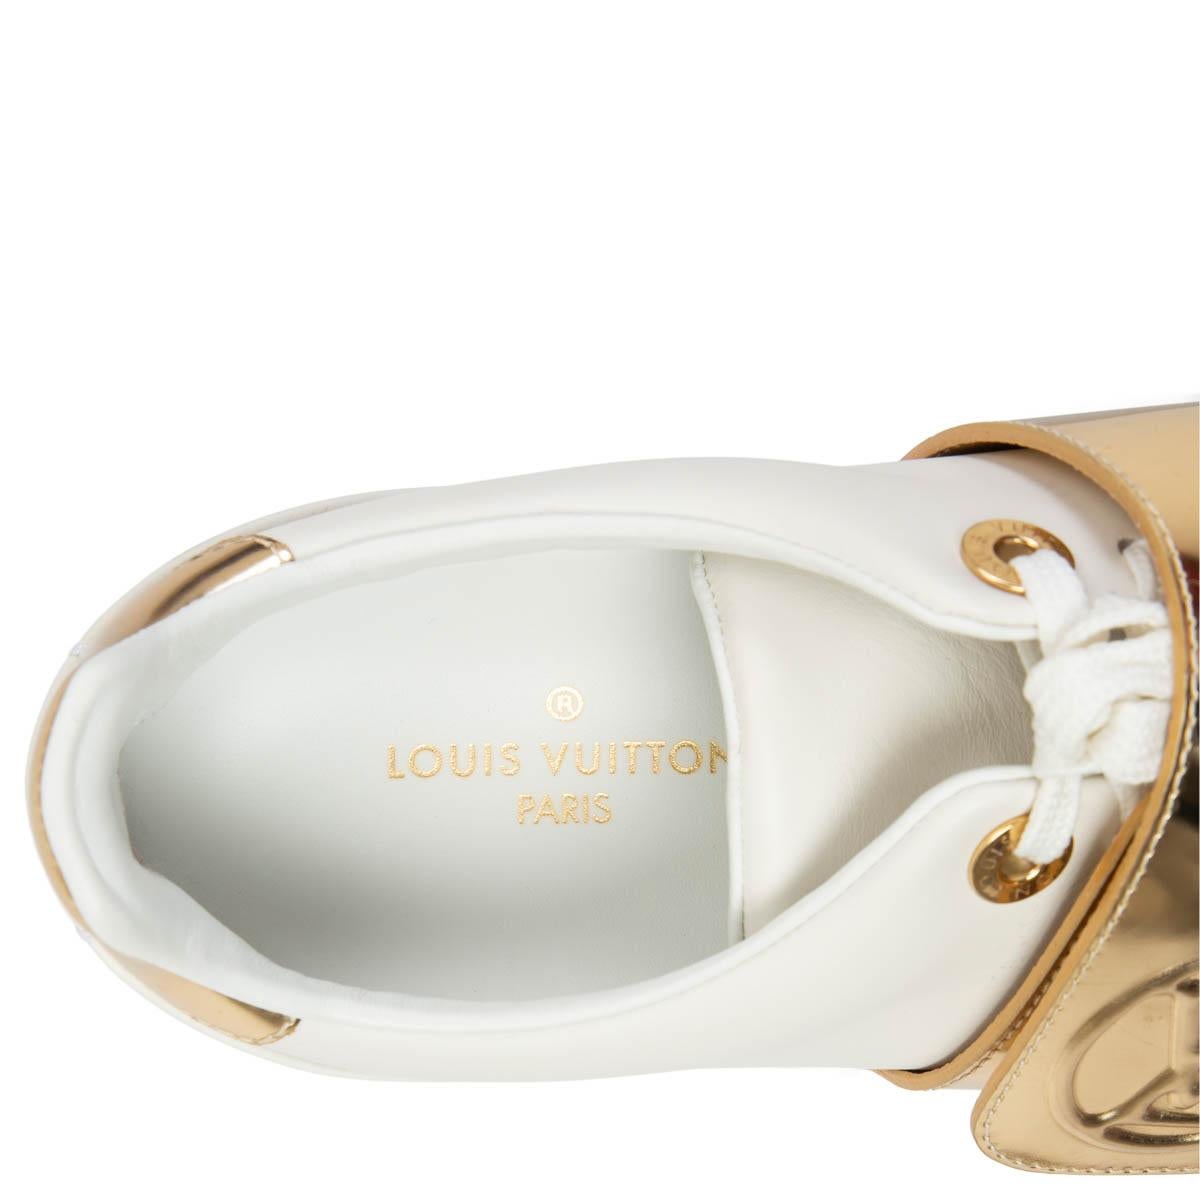 Beige LOUIS VUITTON white & gold leather FRONT ROW Low Top Sneakers Shoes 36 For Sale